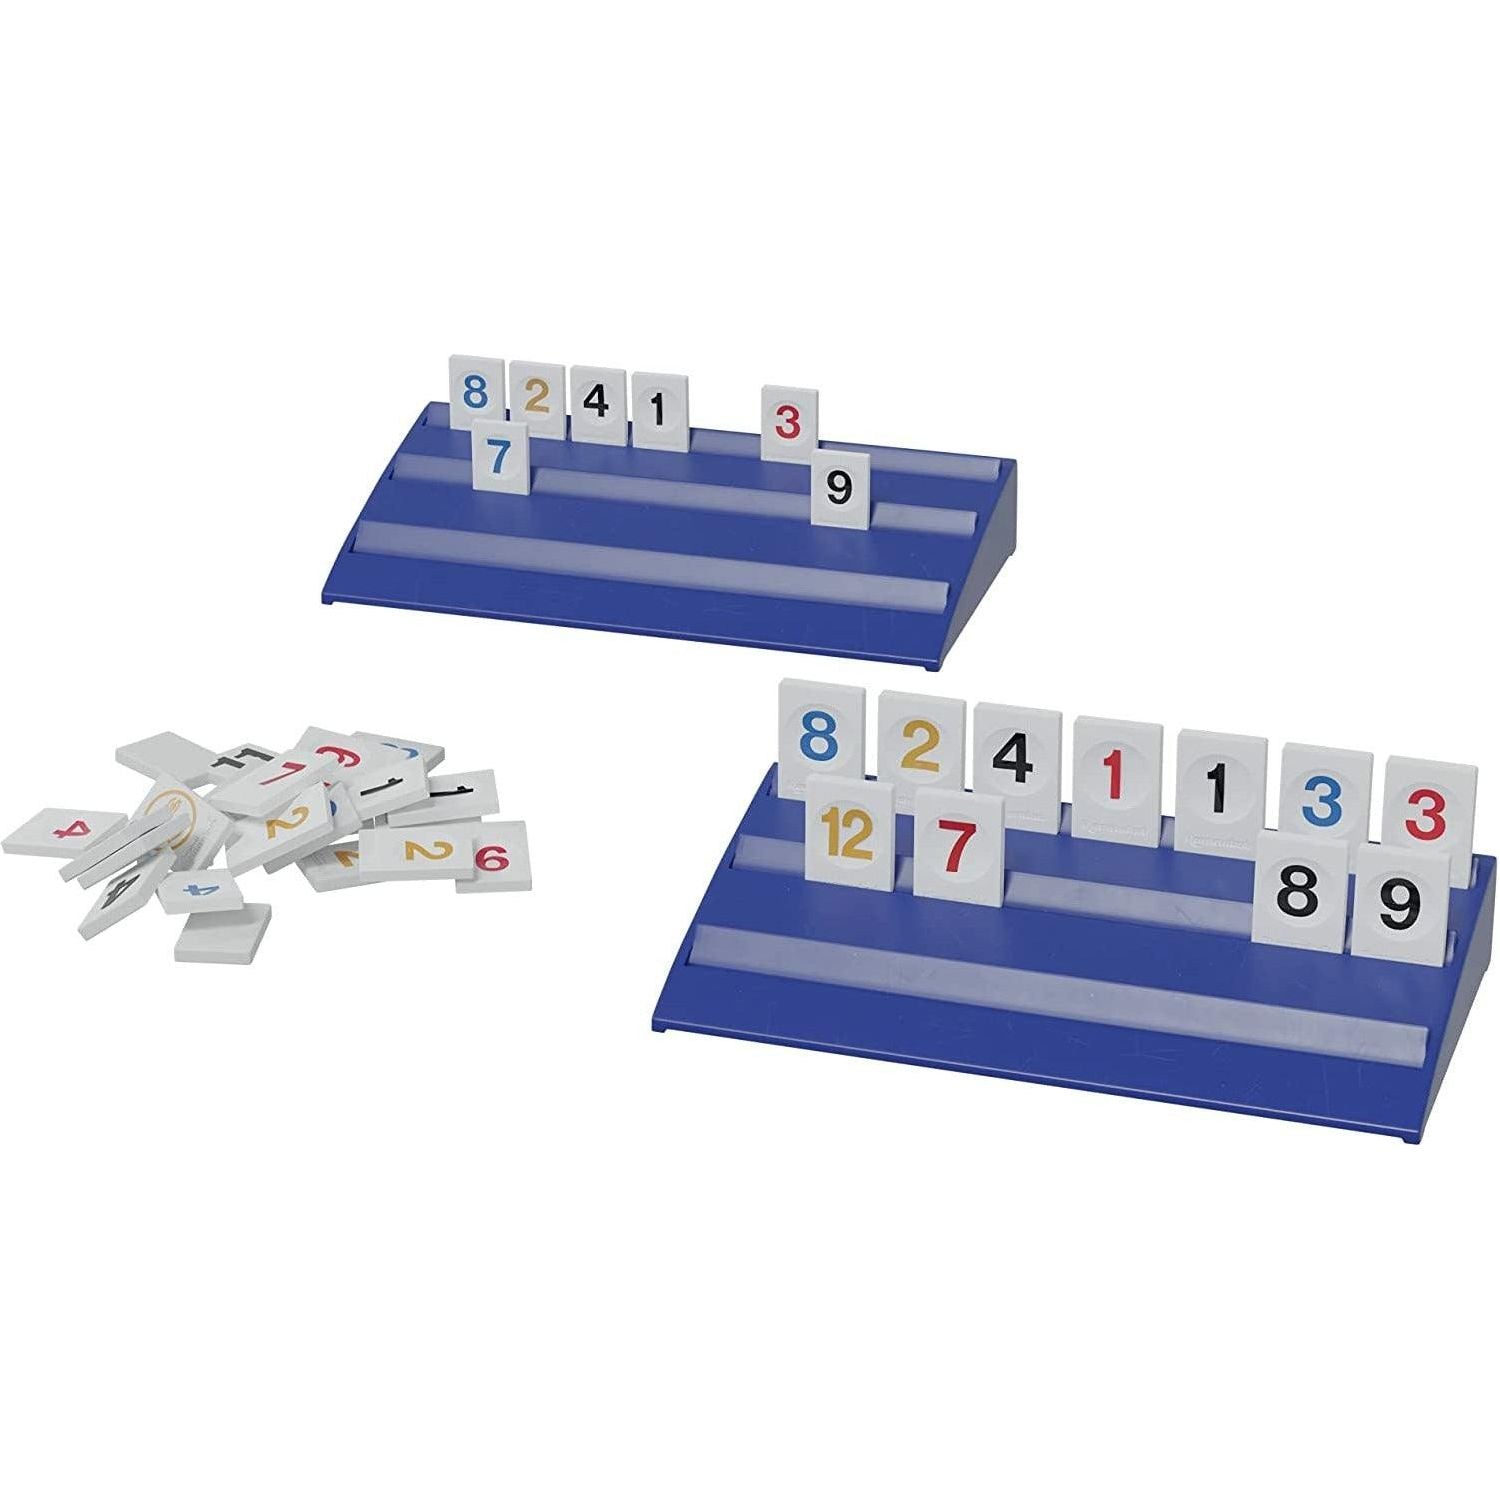 Rummikub Classic Edition The Original Rummy Tile Game - Blue - BumbleToys - 8-13 Years, Card & Board Games, OXE, Pre-Order, Unisex